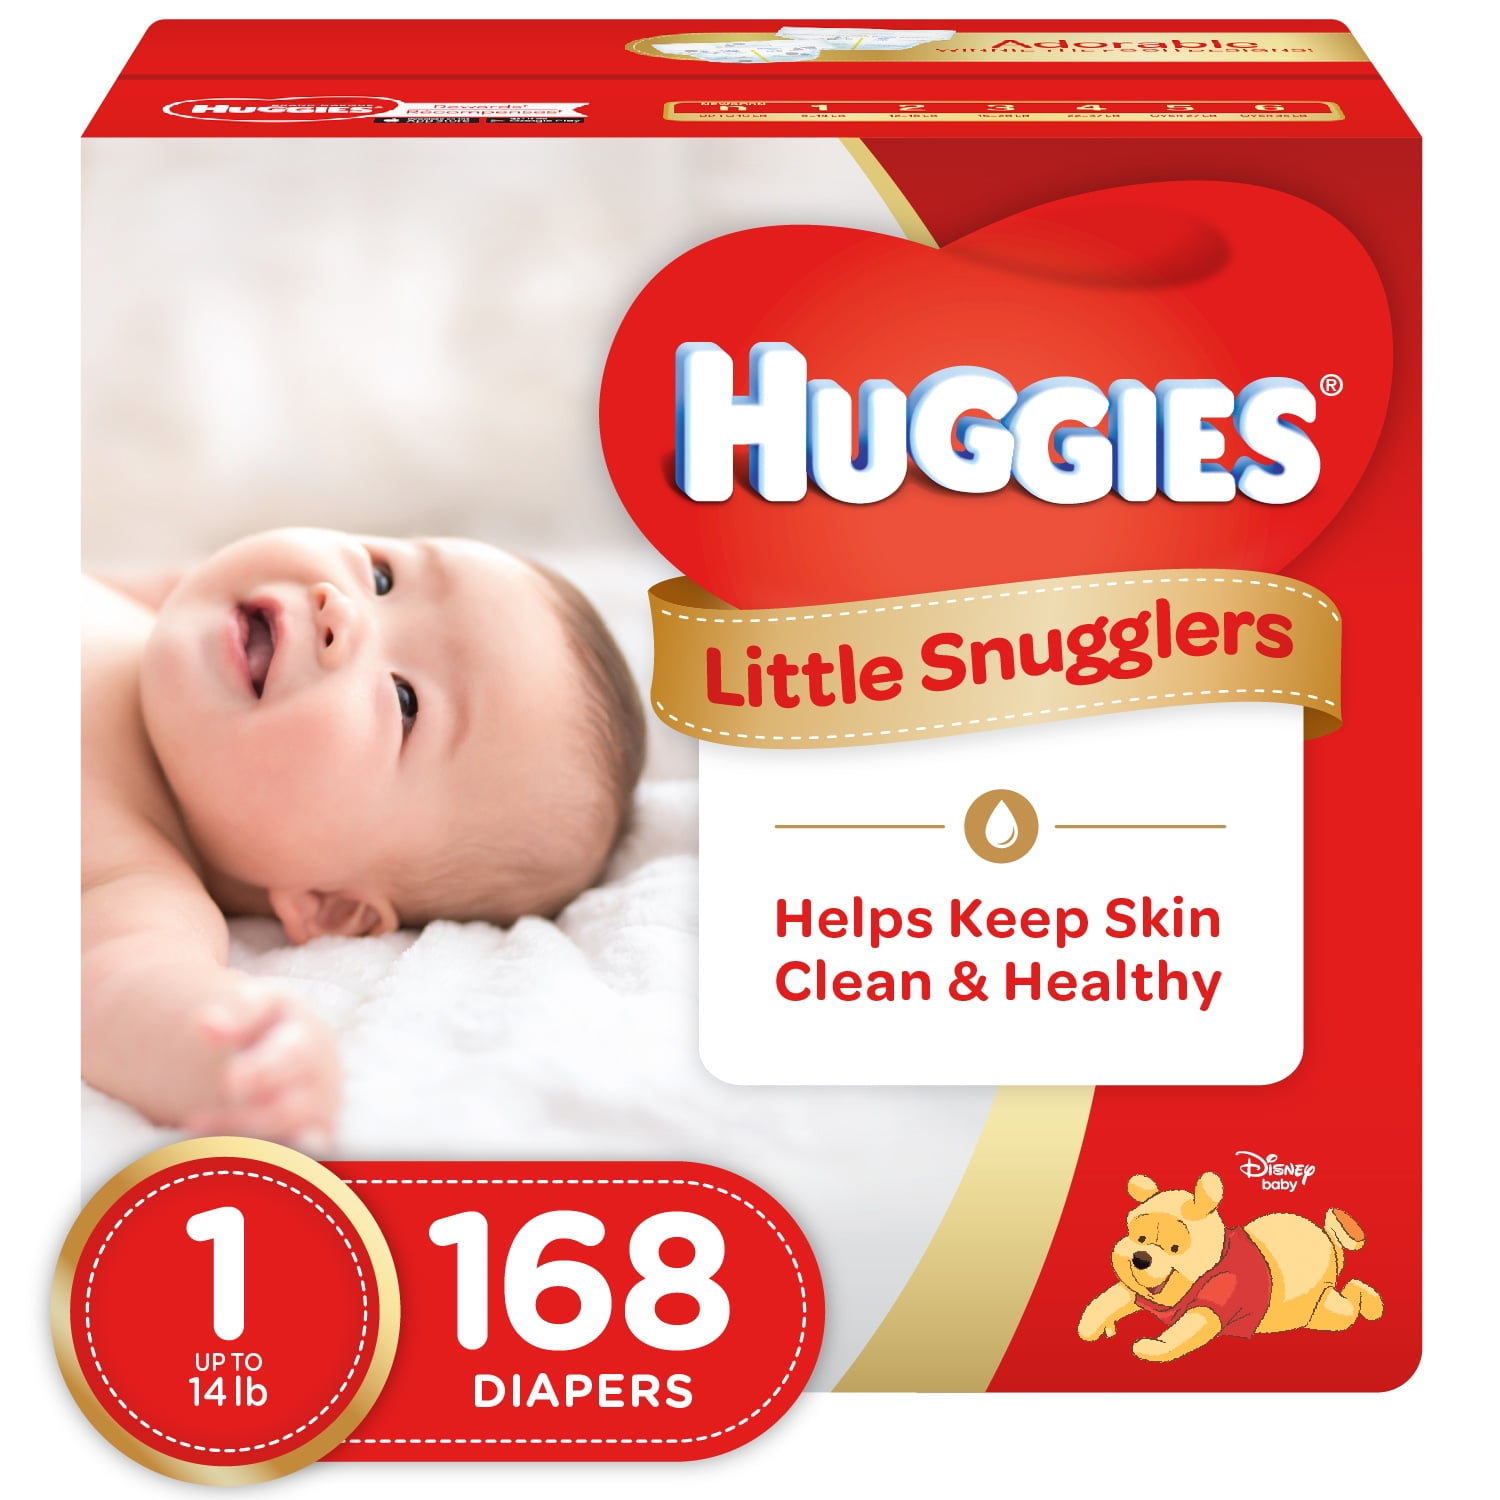 Winnie The Pooh 2016 Details about   Huggies Little Snugglers Preemies for Reborn or other doll